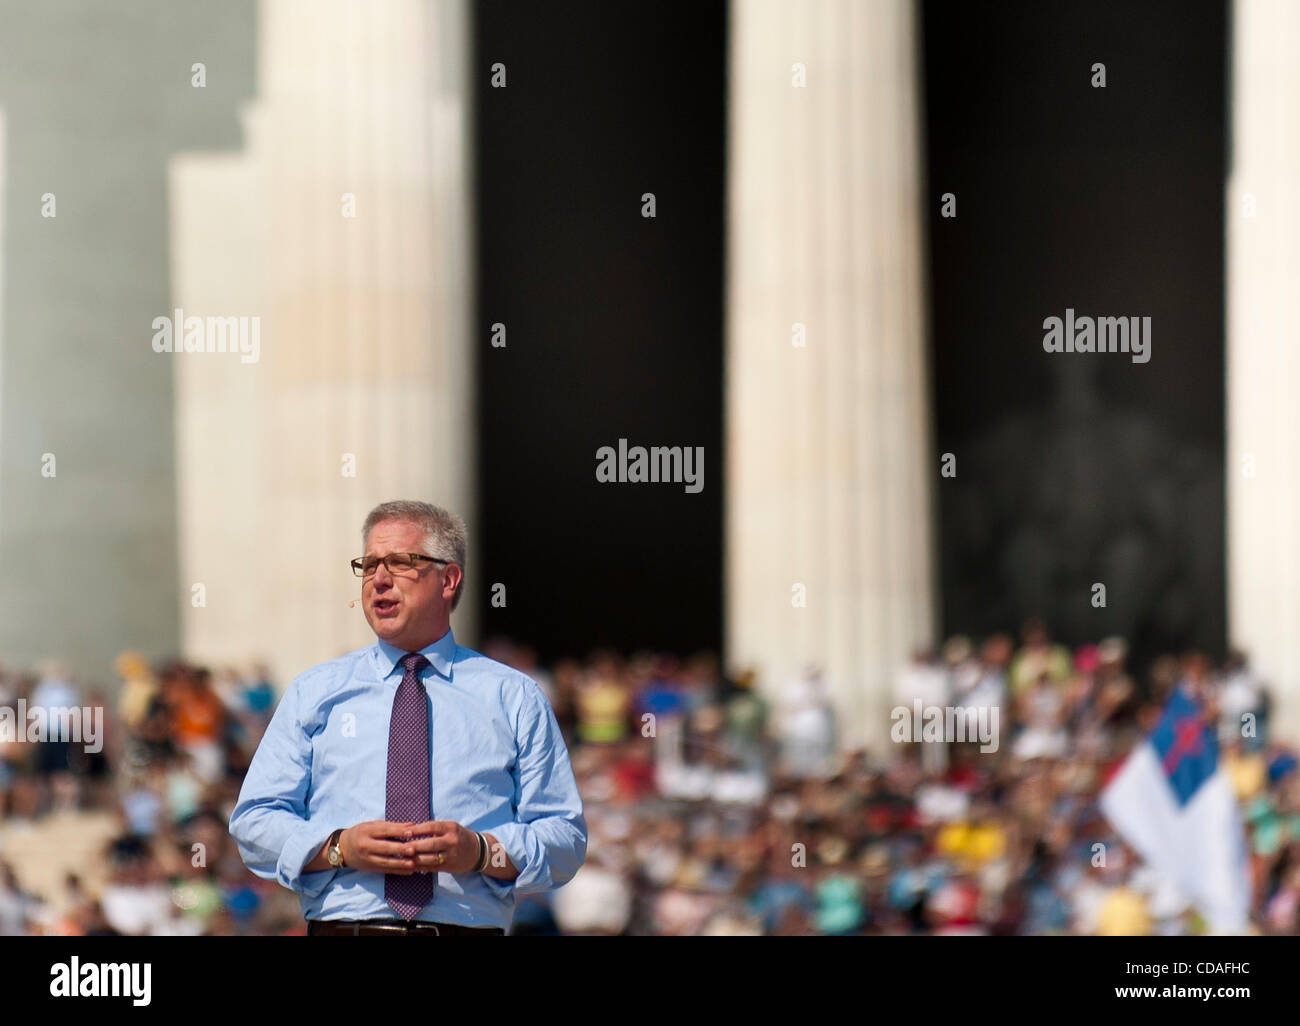 Aug 28, 2010 - Washington, District of Columbia, U.S., - On the 47th anniversary of Dr. Martin Luther King Jr.'s  ''I Have a Dream'' speech, radio host GLENN BECK kicked off his ''Restoring Honor'' rally on the steps of the Lincoln Memorial in Washinton, D.C. The event, which Beck called a non-parti Stock Photo